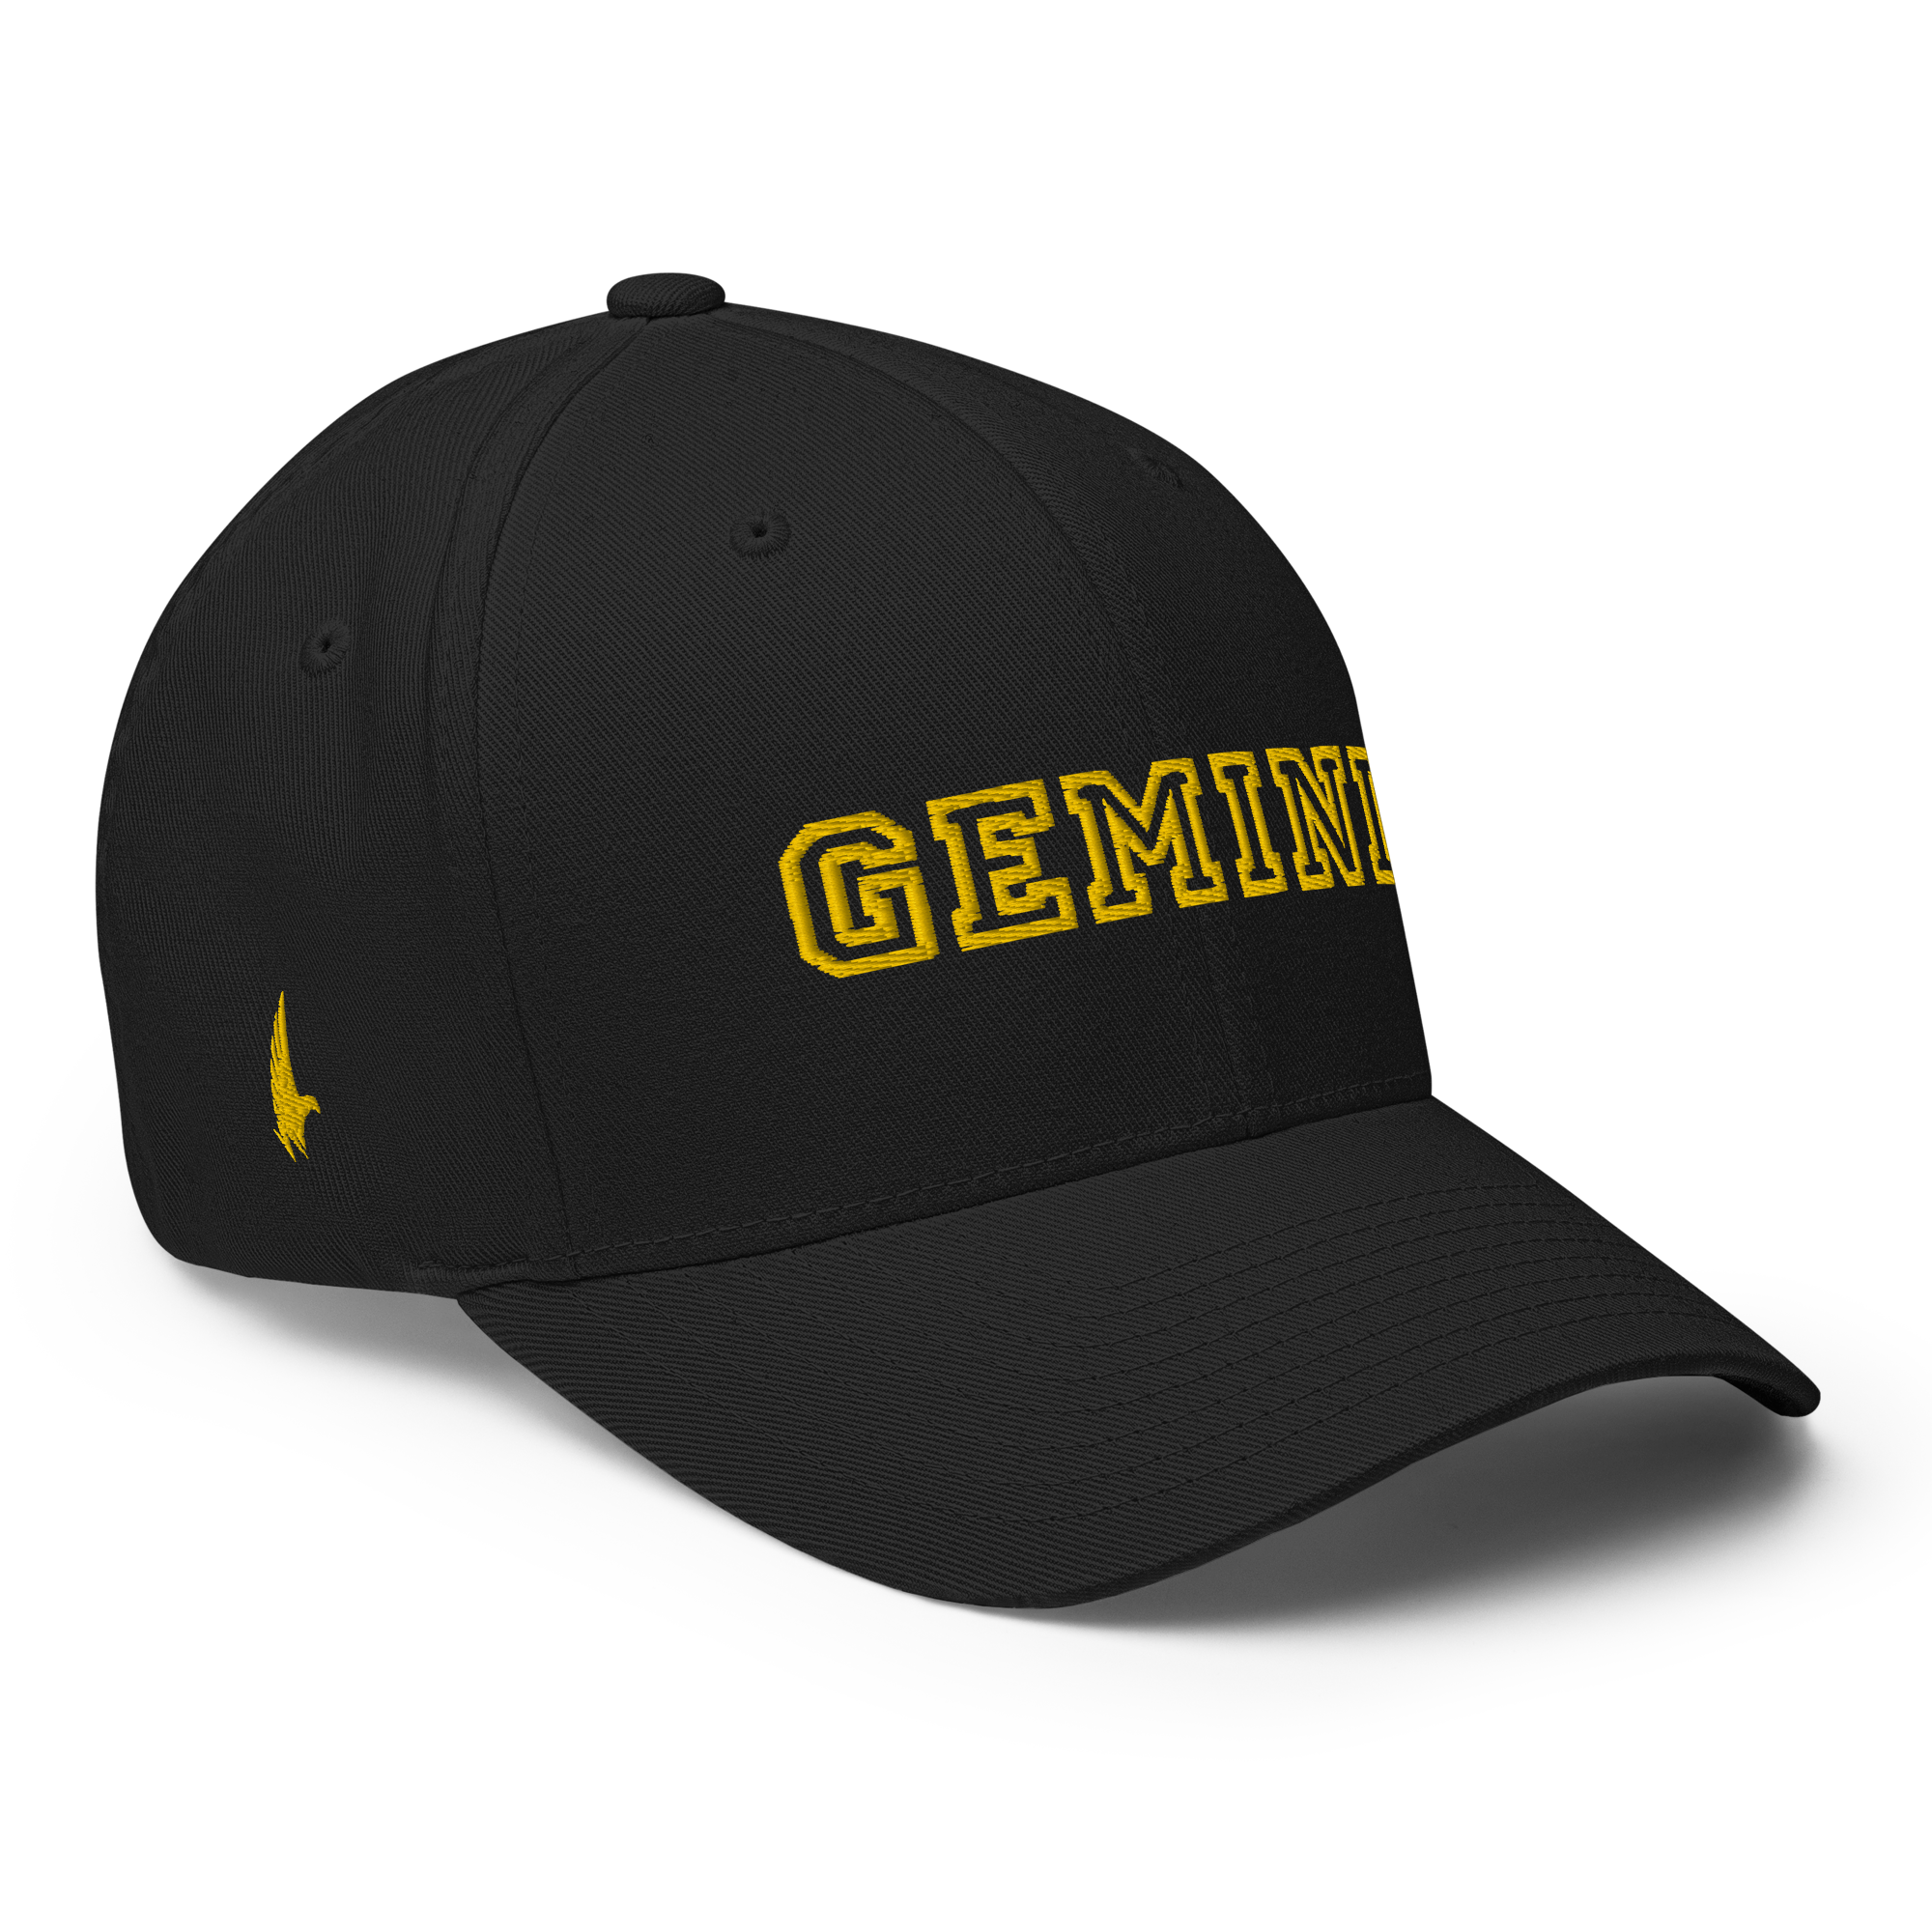 Gemini Legacy Fitted Hat Black - Loyalty Vibes